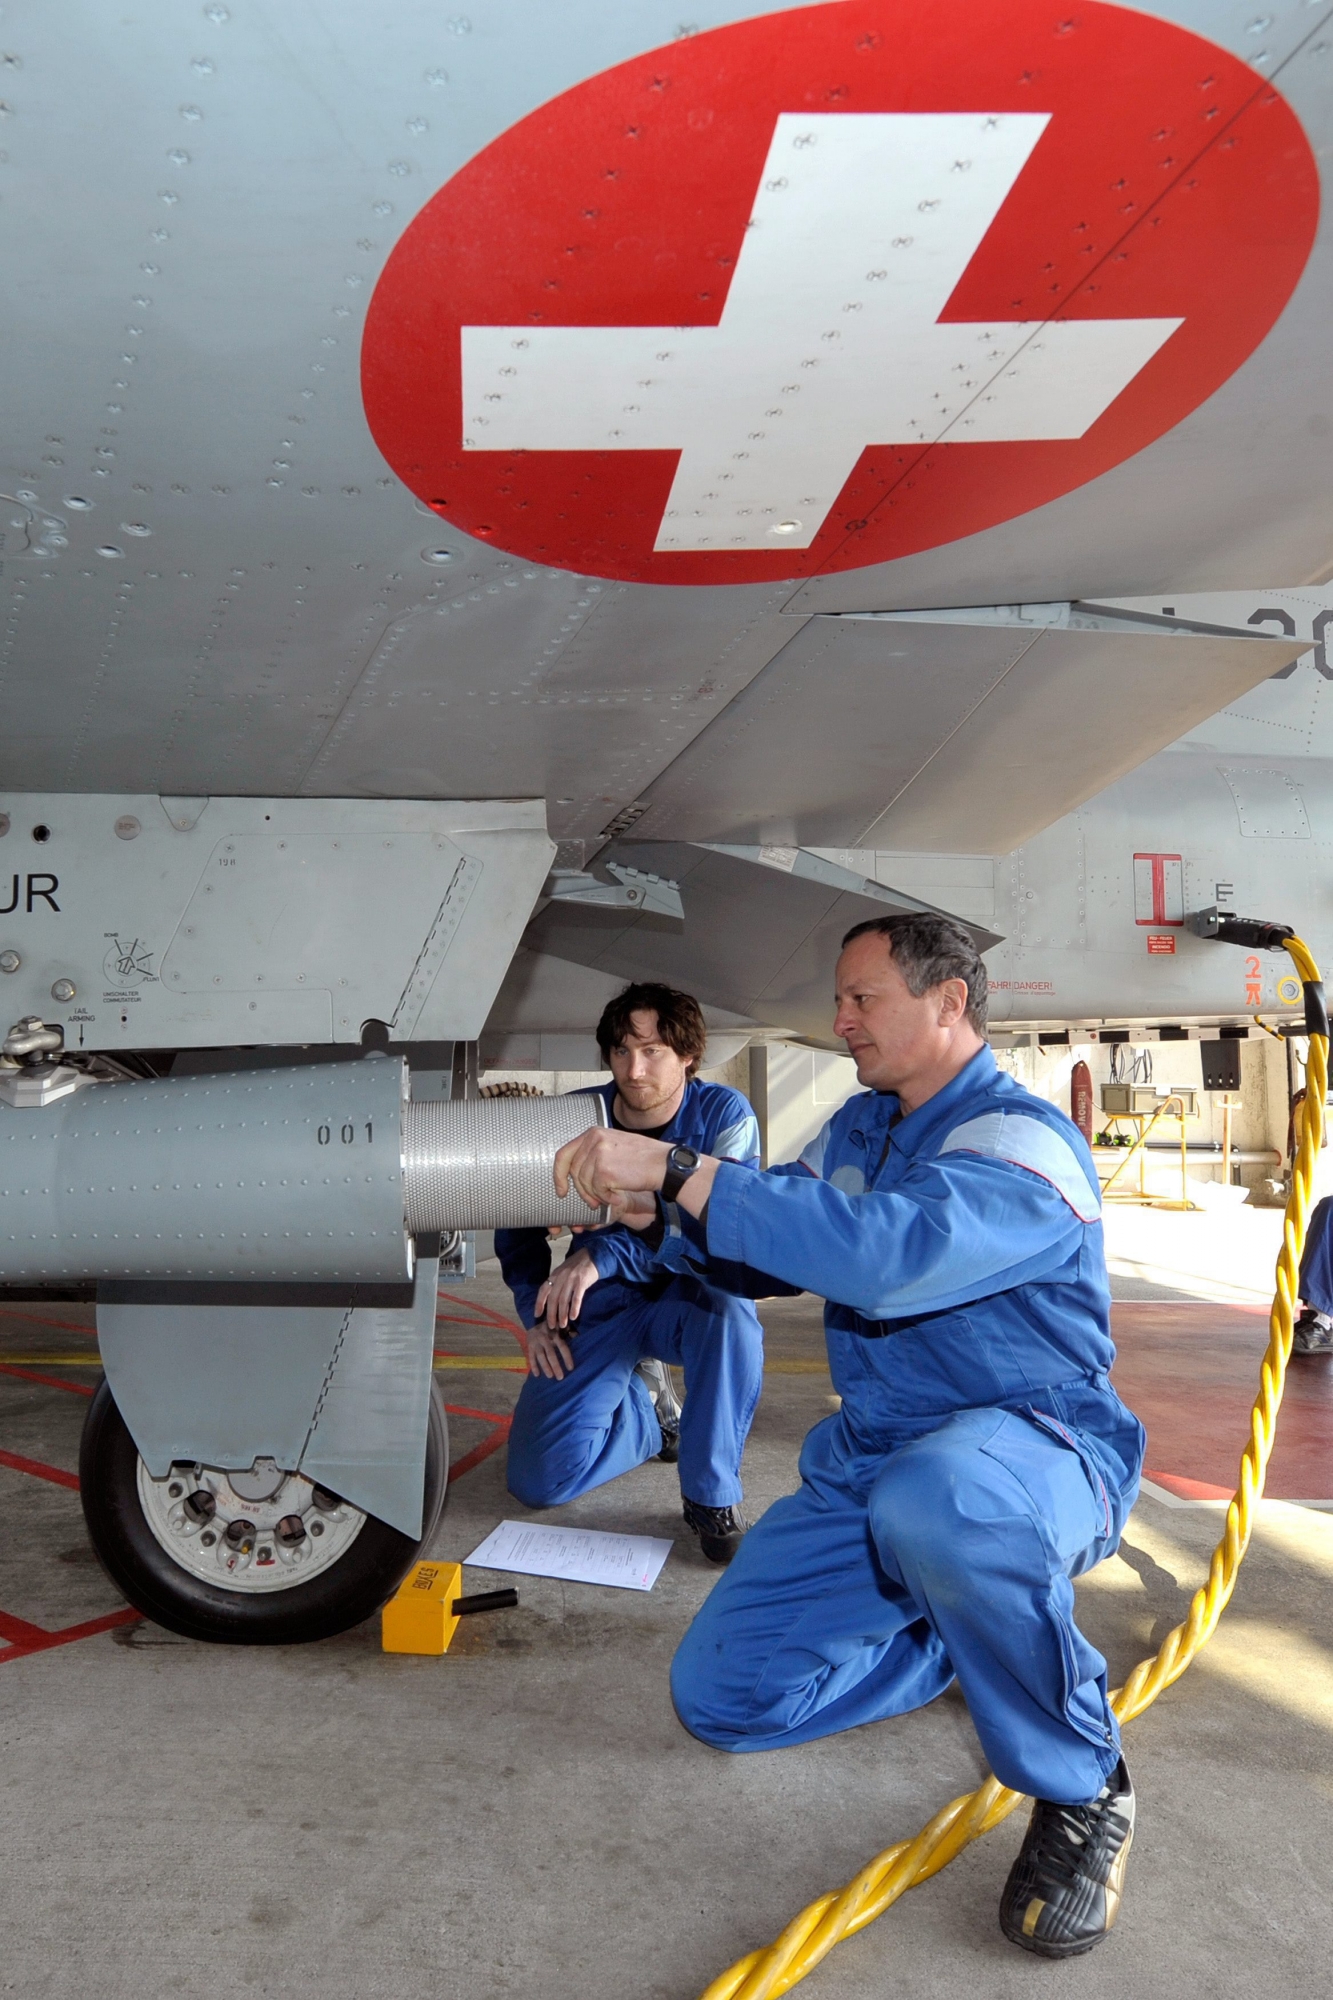 A worker removes a aerosol collector of a Swiss Air Force F-5E Tiger aircraft in Payerne after a radioactivity measurements flight over Switzerland, Wednesday March 23, 2011. An aerosol collector is located under each wings of the aircraft and filters the air to collect fines particles at an altitude of 6,000 meters (19,684 feet). The Federal Office of Public Health (FOPH) has been conducting flights on a regular basis in the past years to monitor the radioactivity but due to the situation in Japan decided to increase them until end of March 2011. (KEYSTONE/Dominic Favre) SWITZERLAND